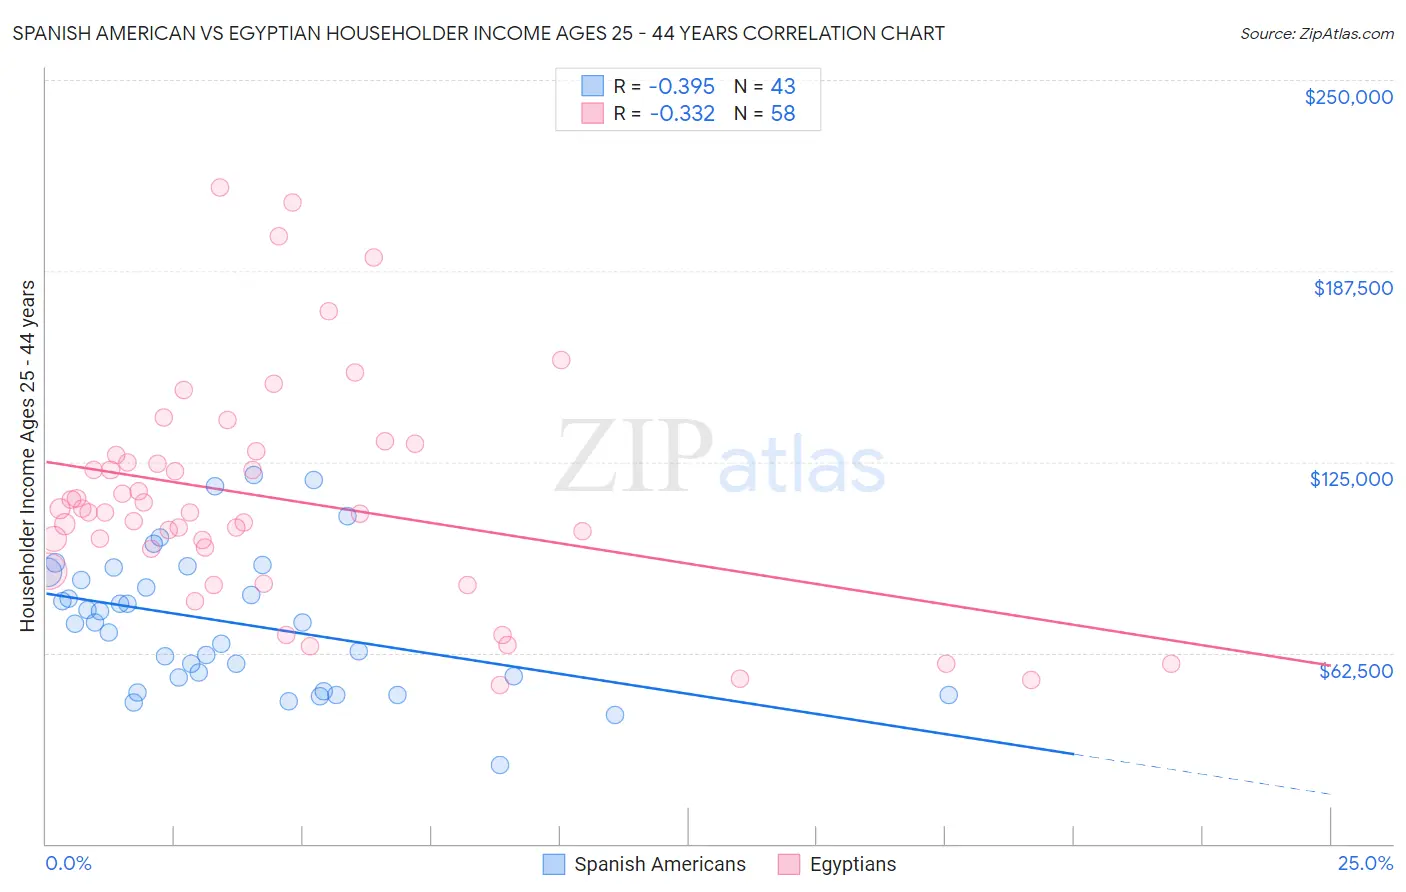 Spanish American vs Egyptian Householder Income Ages 25 - 44 years